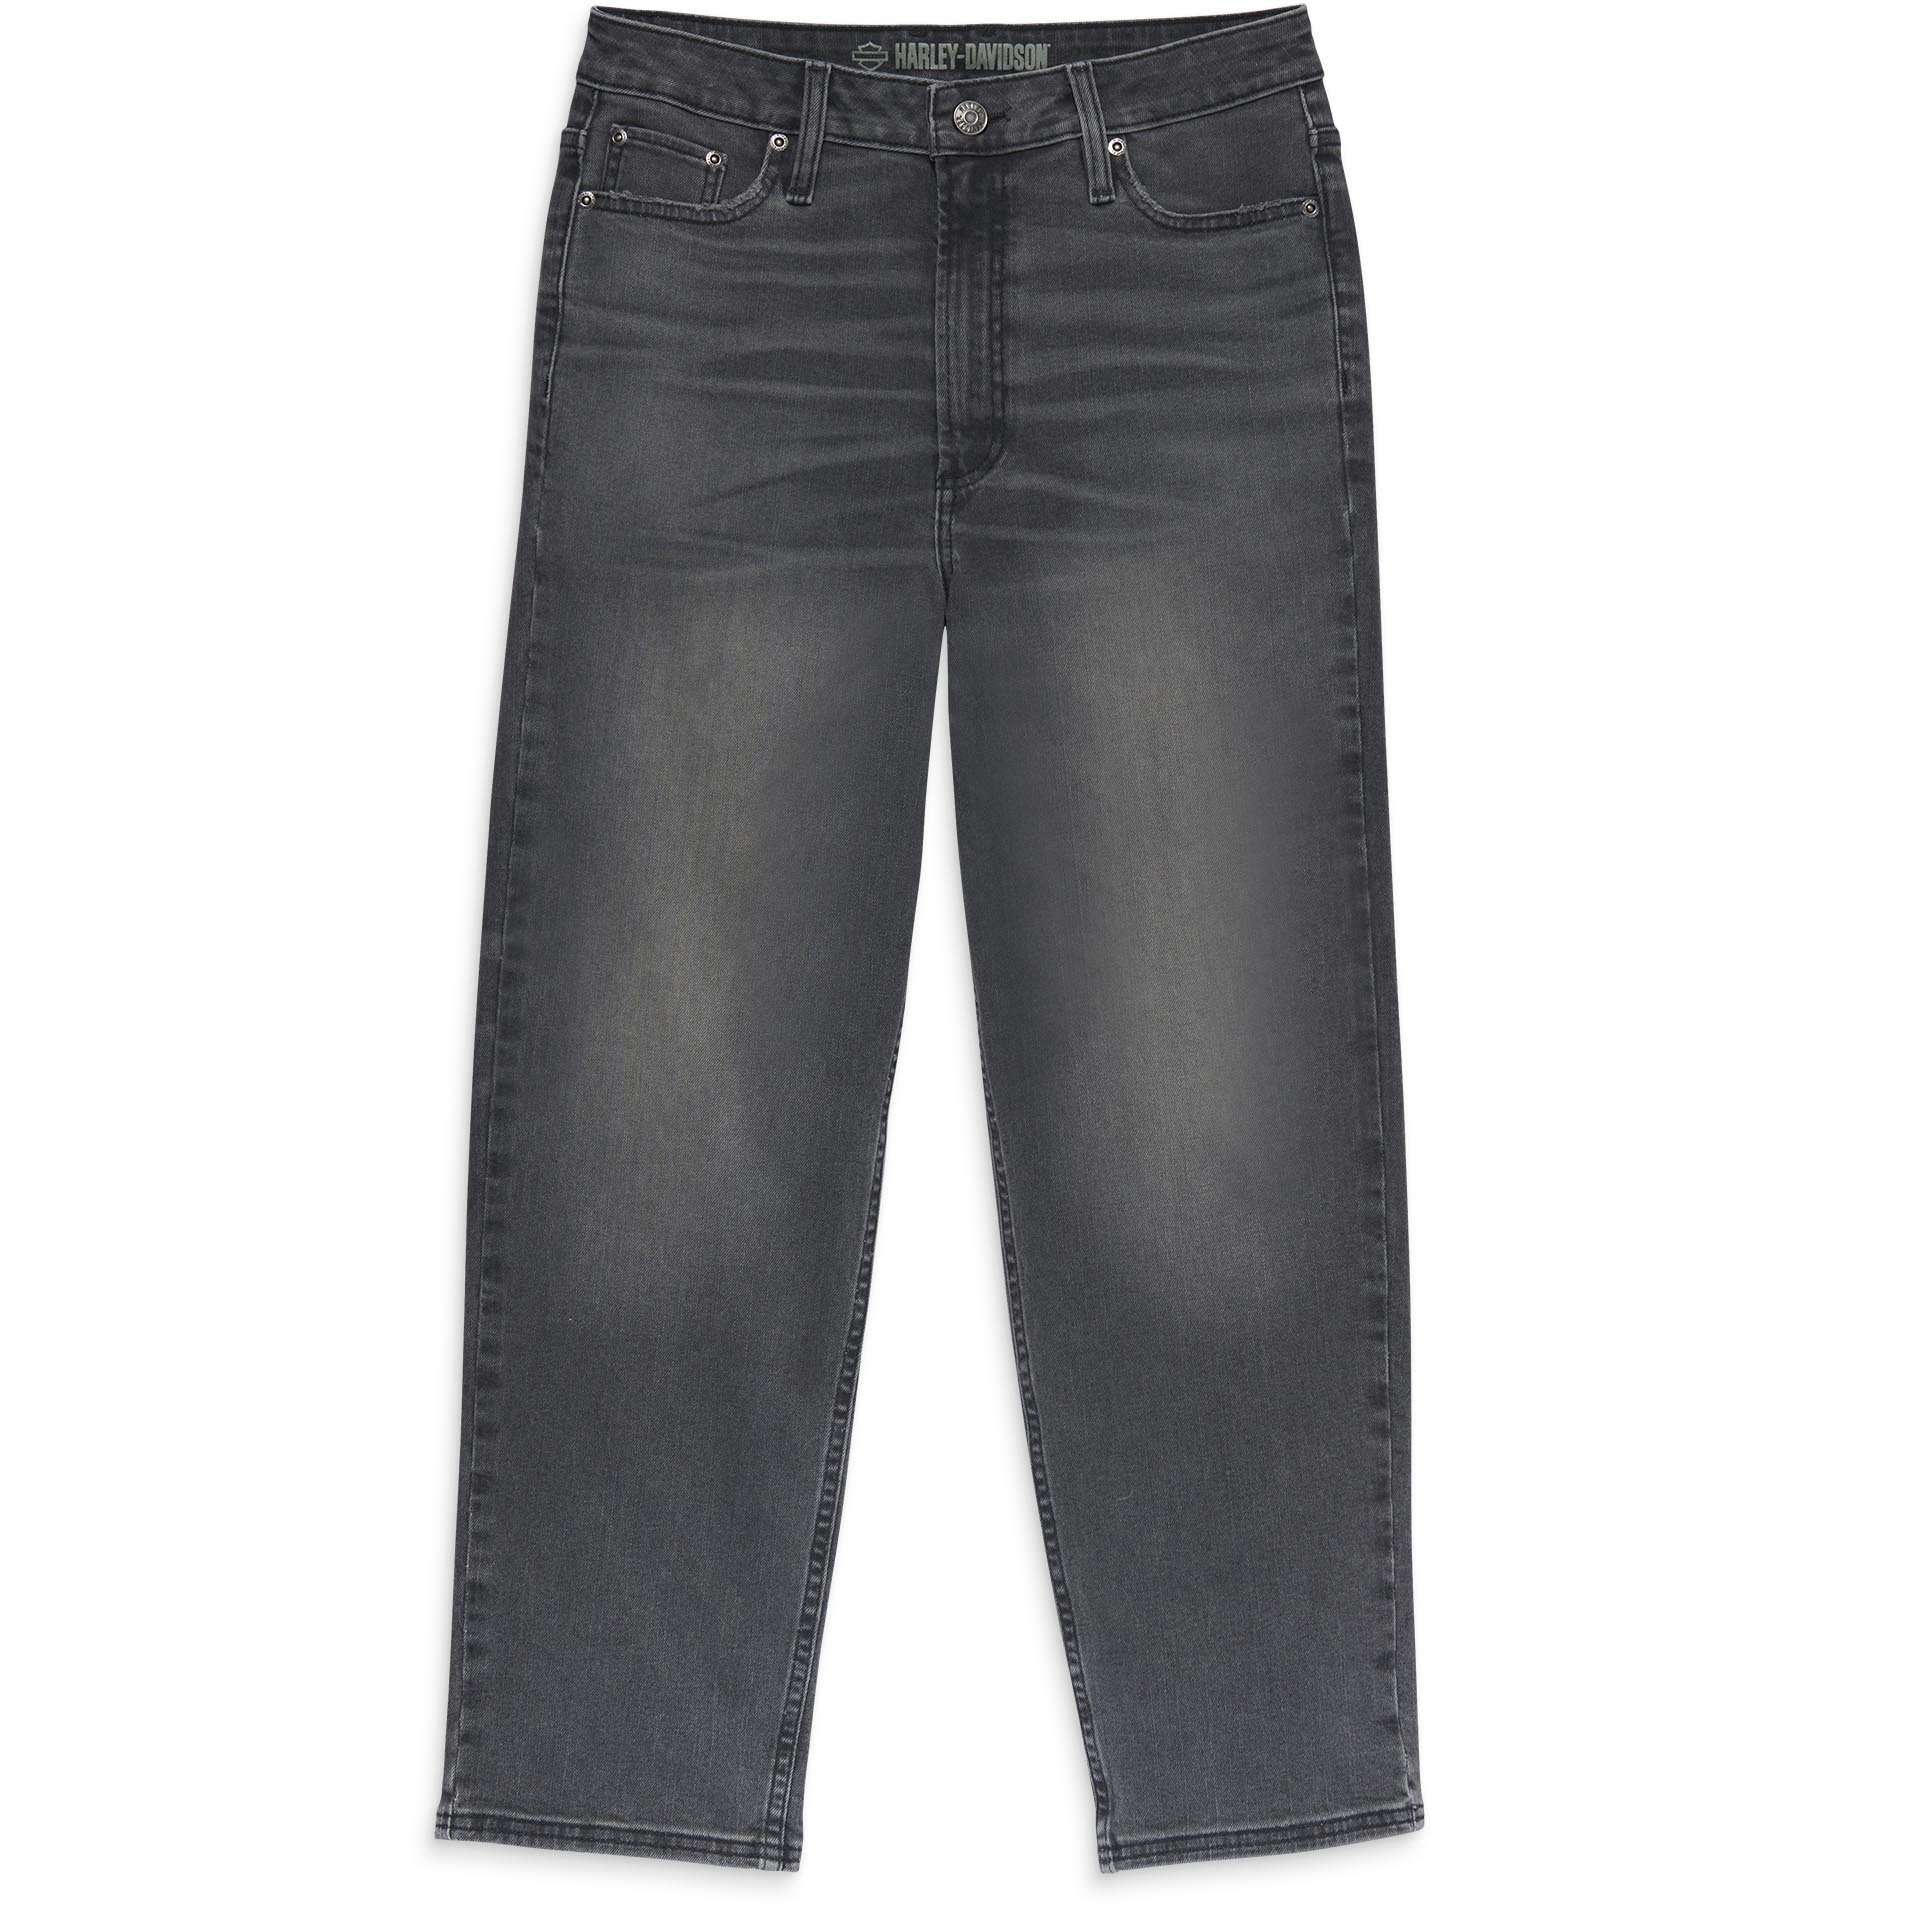 Harley-Davidson Women's Adrenalin High Waisted Ankle Jeans 96289-23VW ...